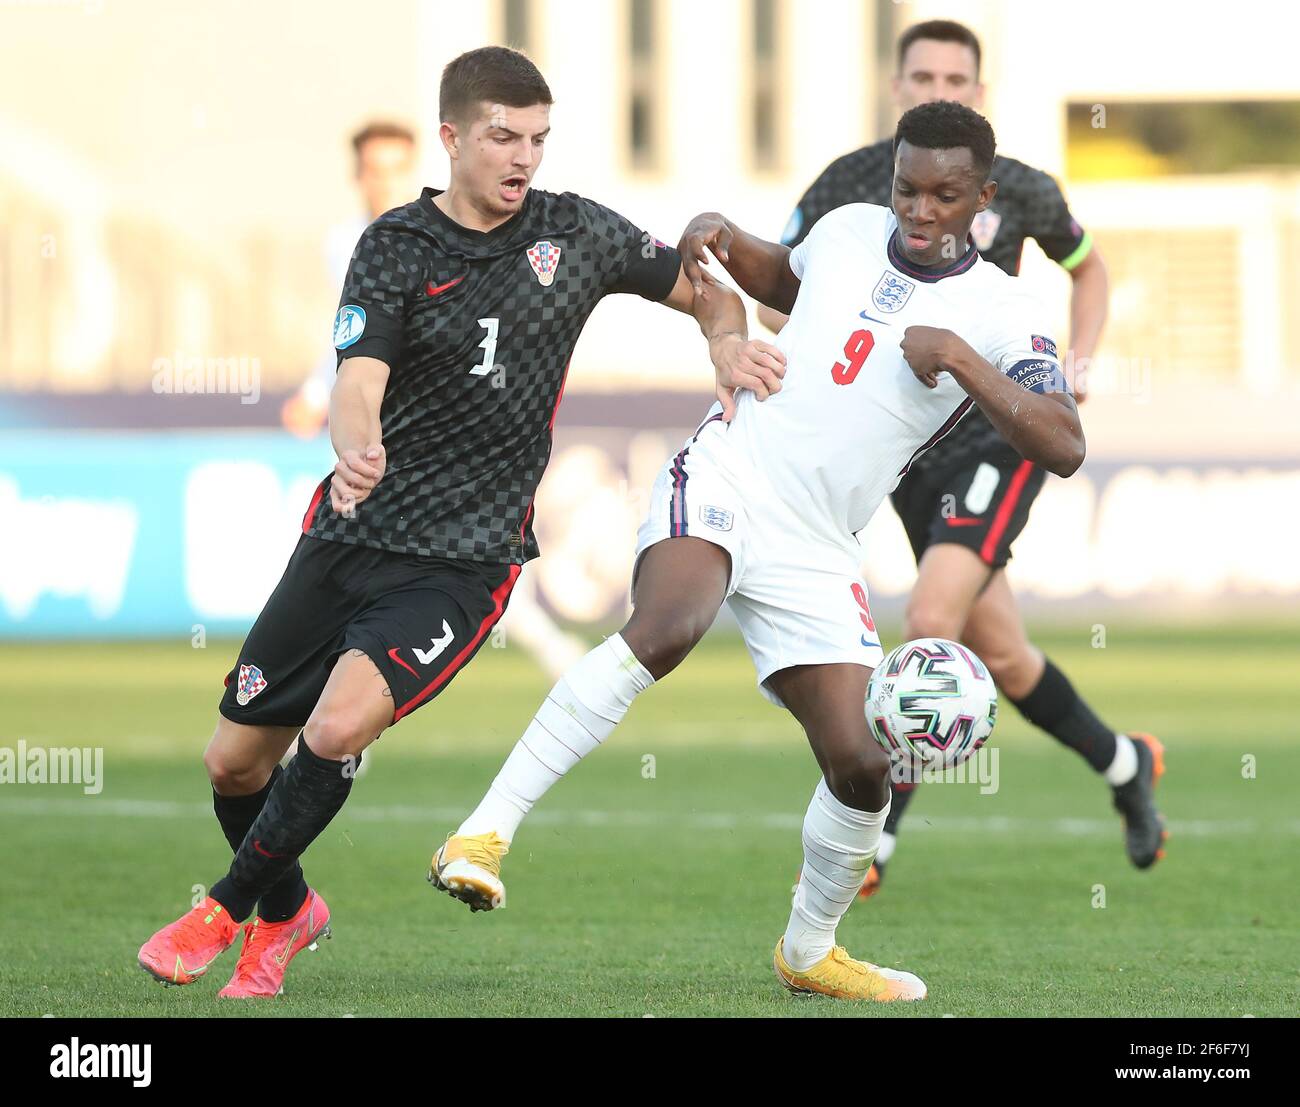 https://c8.alamy.com/comp/2F6F7YJ/englands-eddie-nketiah-right-and-croatias-hrvoje-babec-battle-for-the-ball-during-the-21-uefa-european-under-21-championship-match-at-the-bonifika-stadium-in-koper-slovenia-picture-date-wednesday-march-31-2021-2F6F7YJ.jpg